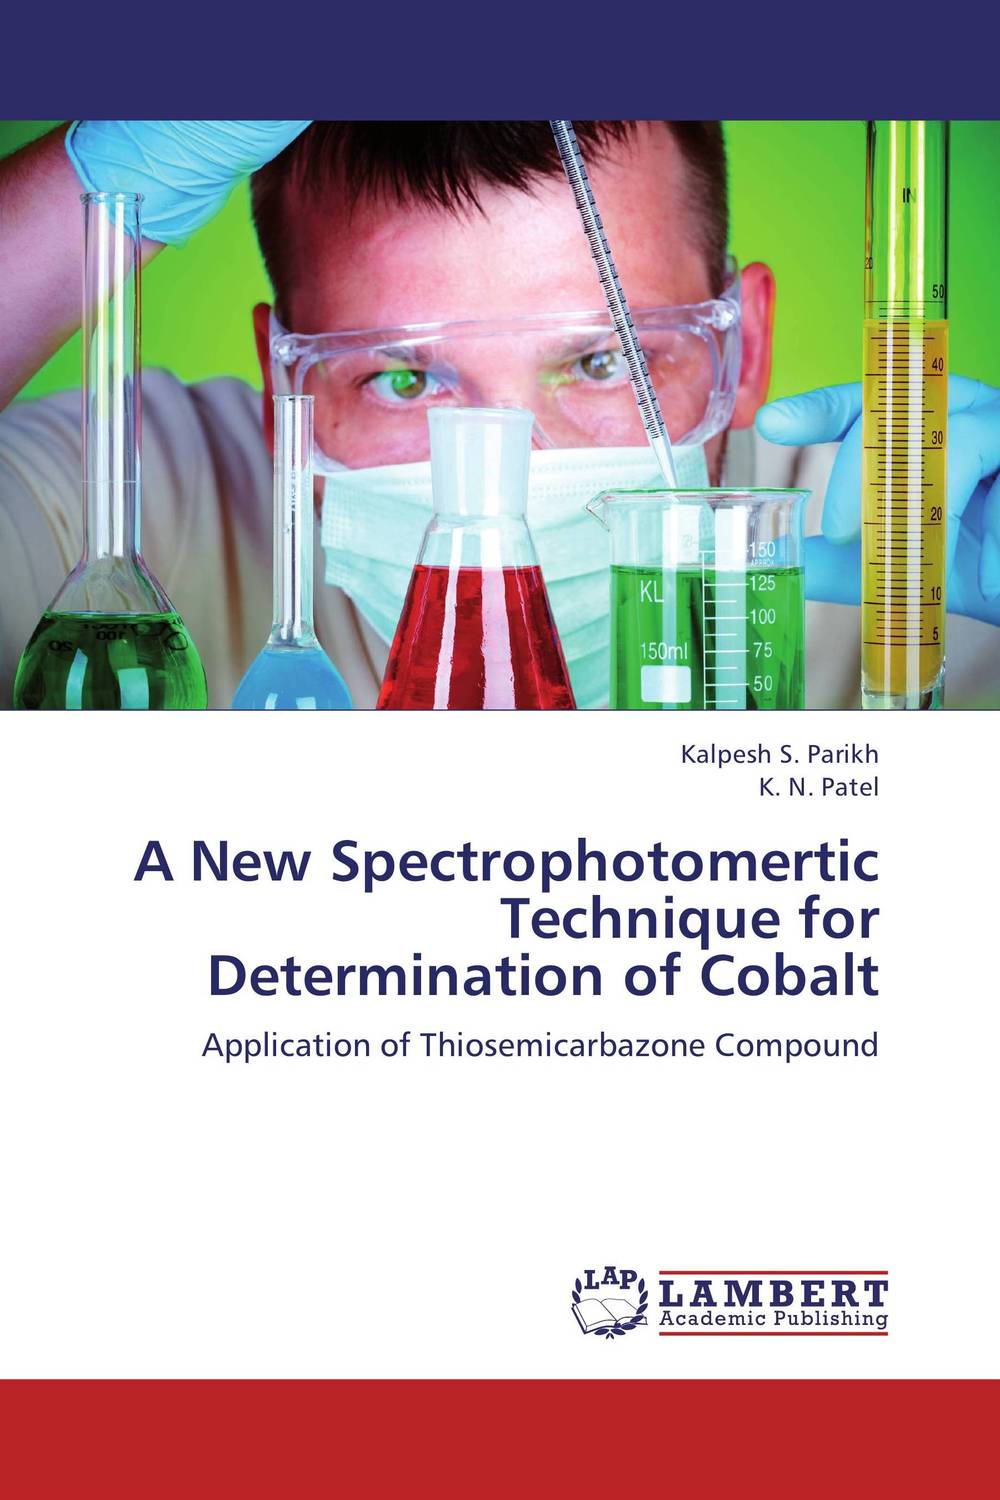 A New Spectrophotomertic Technique for Determination of Cobalt